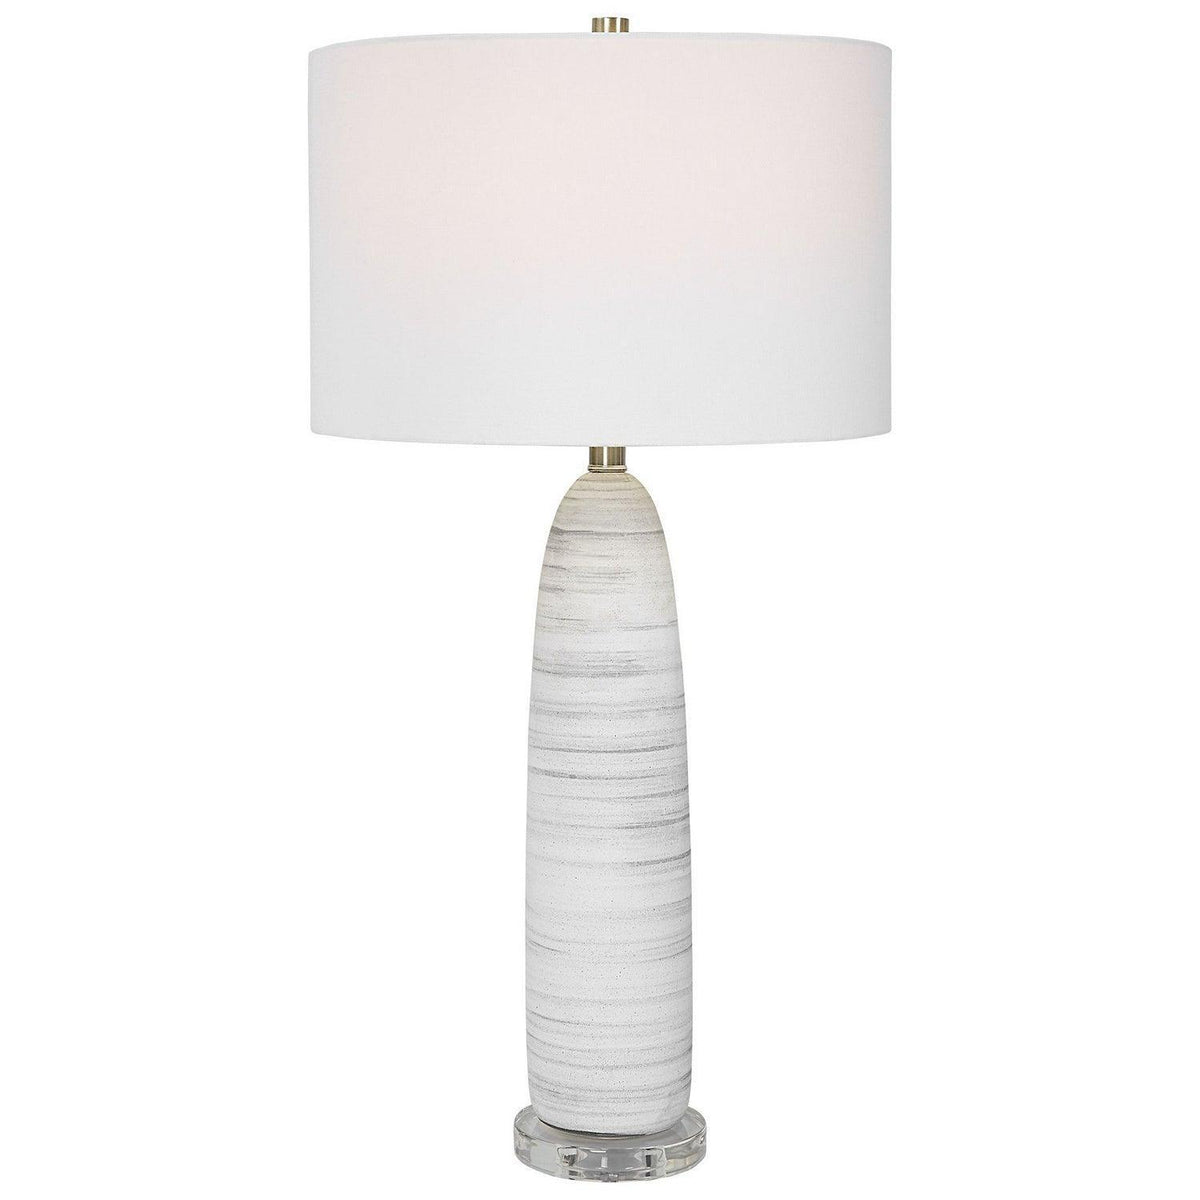 The Uttermost - Levadia Table Lamp - 30004-1 | Montreal Lighting & Hardware